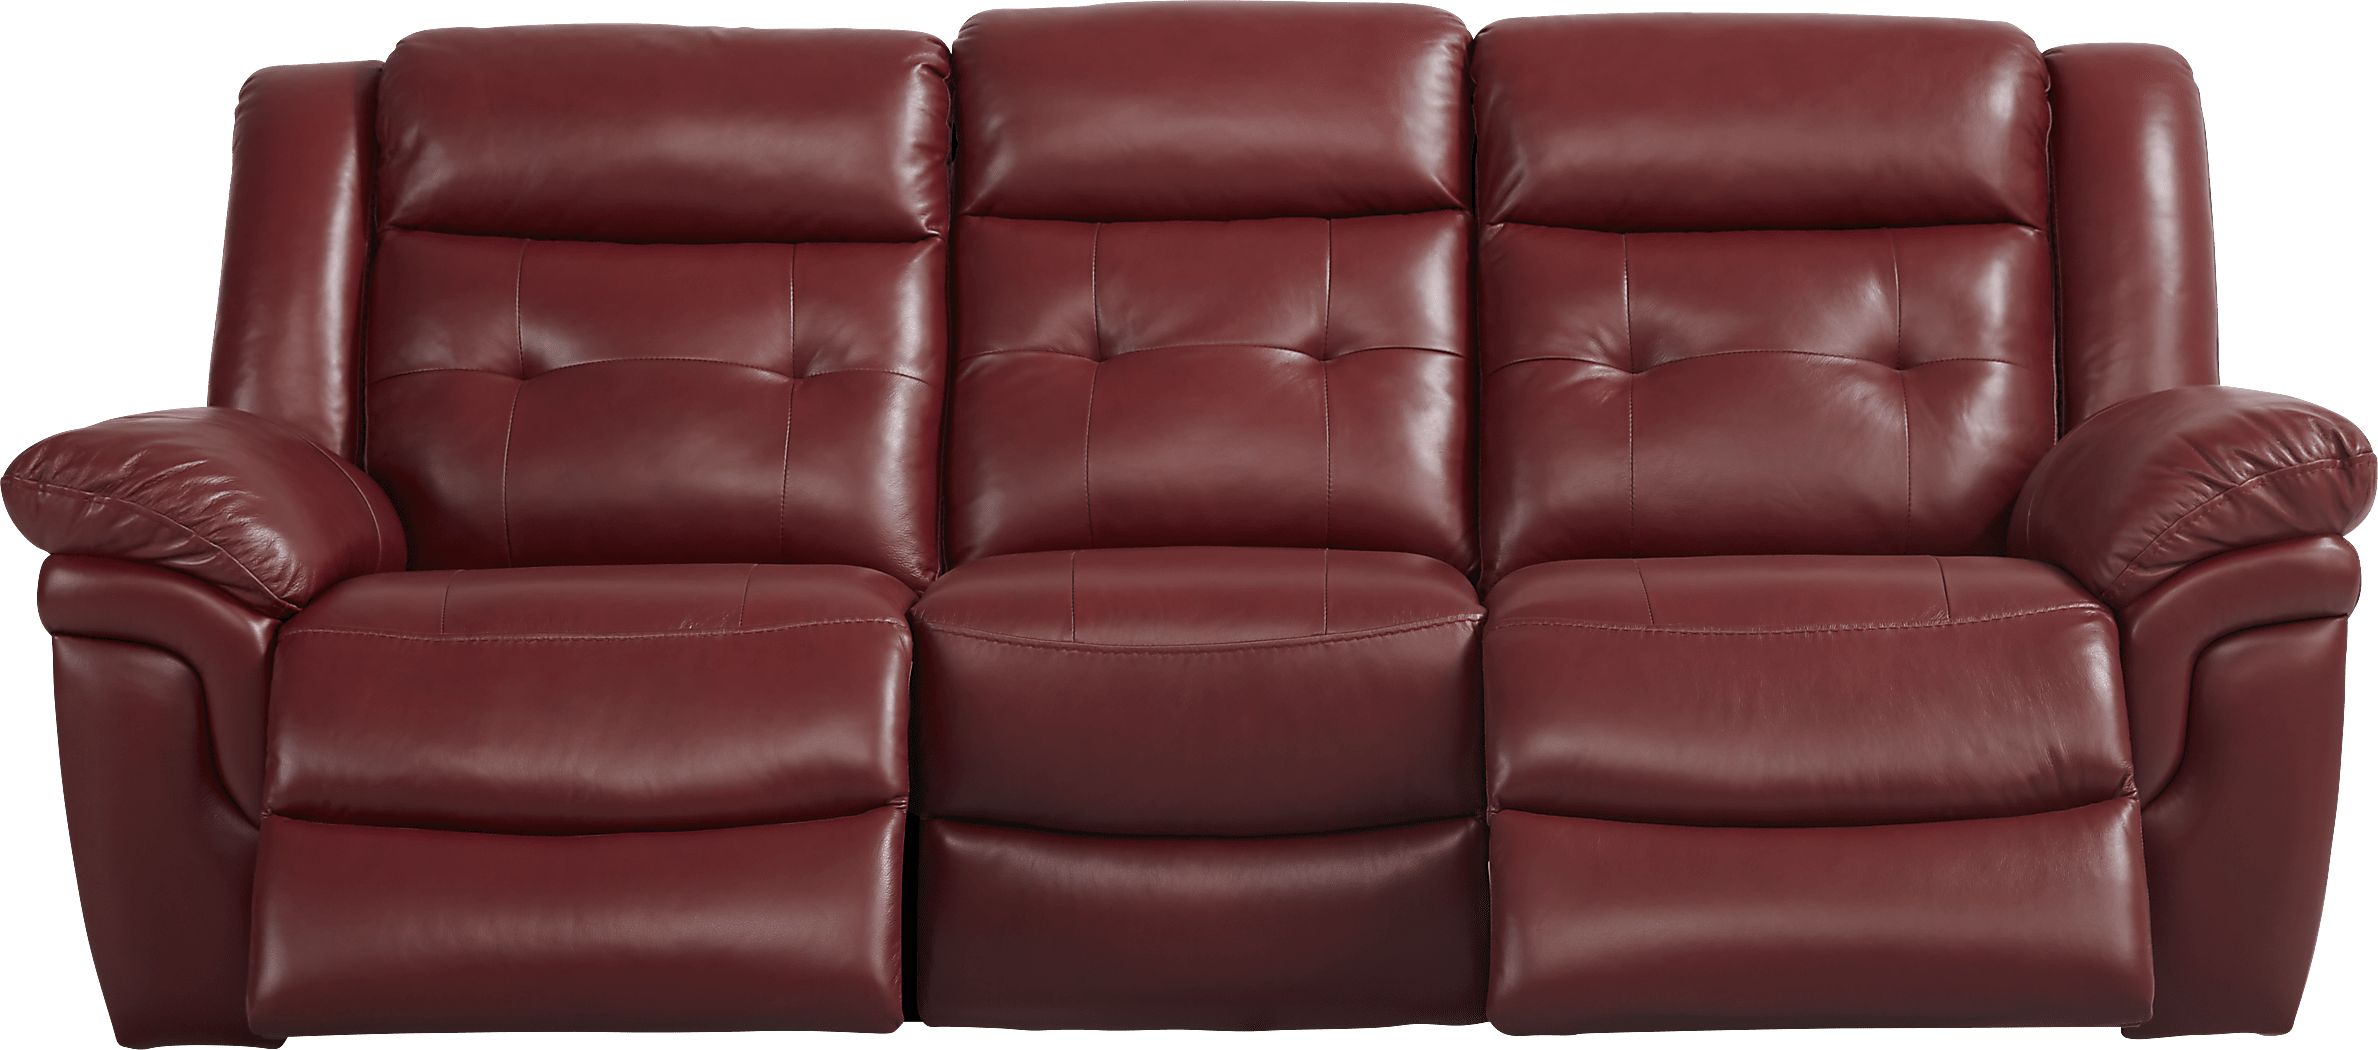 Ventoso Red Leather Power Reclining Sofa